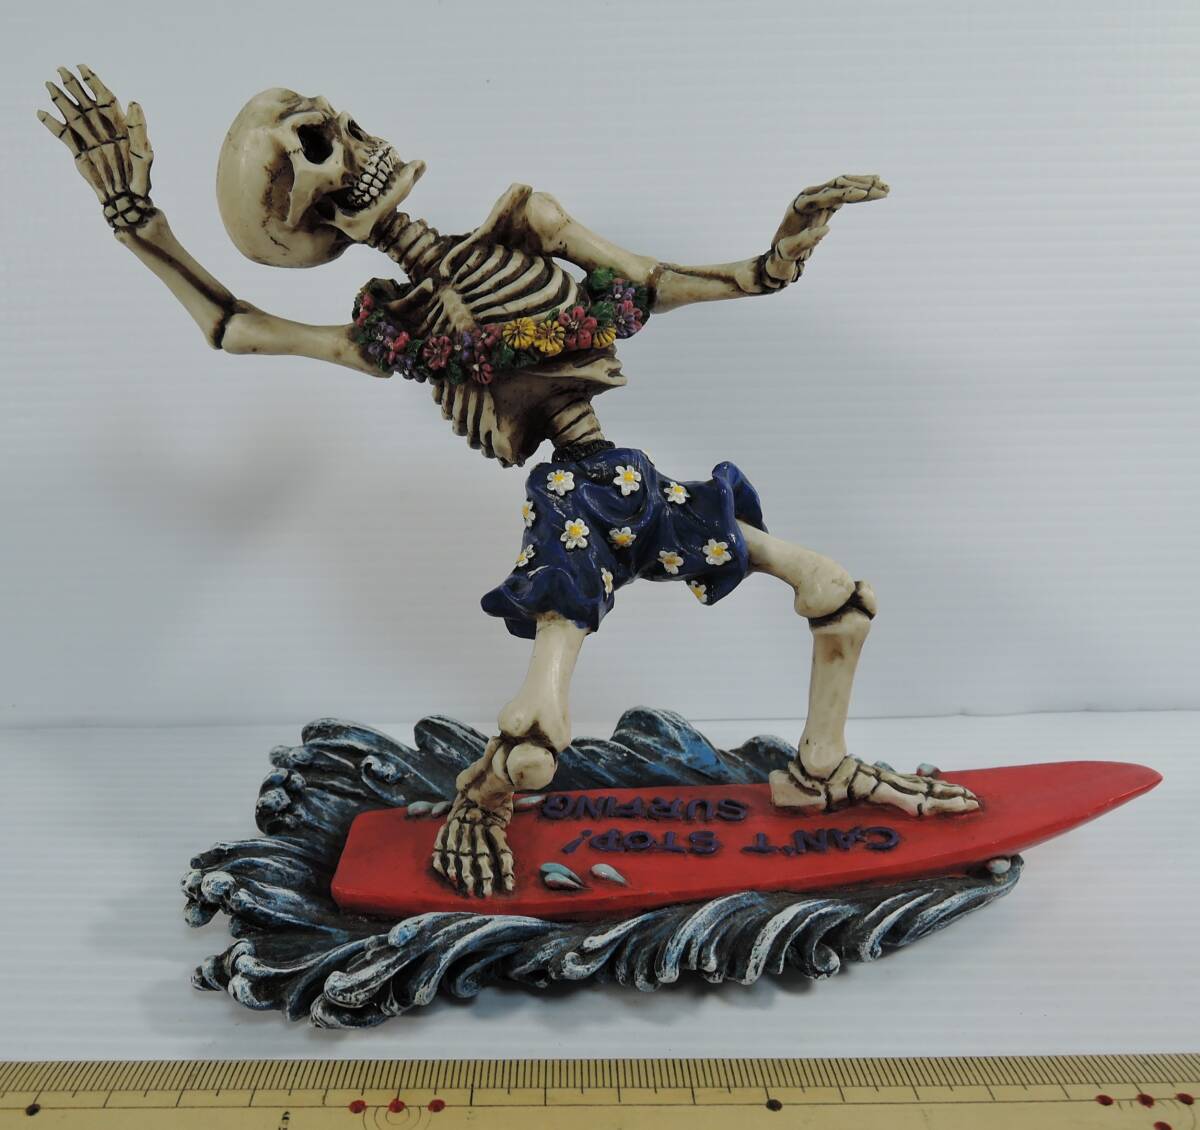 *000 defect have #W*U*I CAN*T STOP! SURFING Skull skeleton surfing figure / ornament #1999